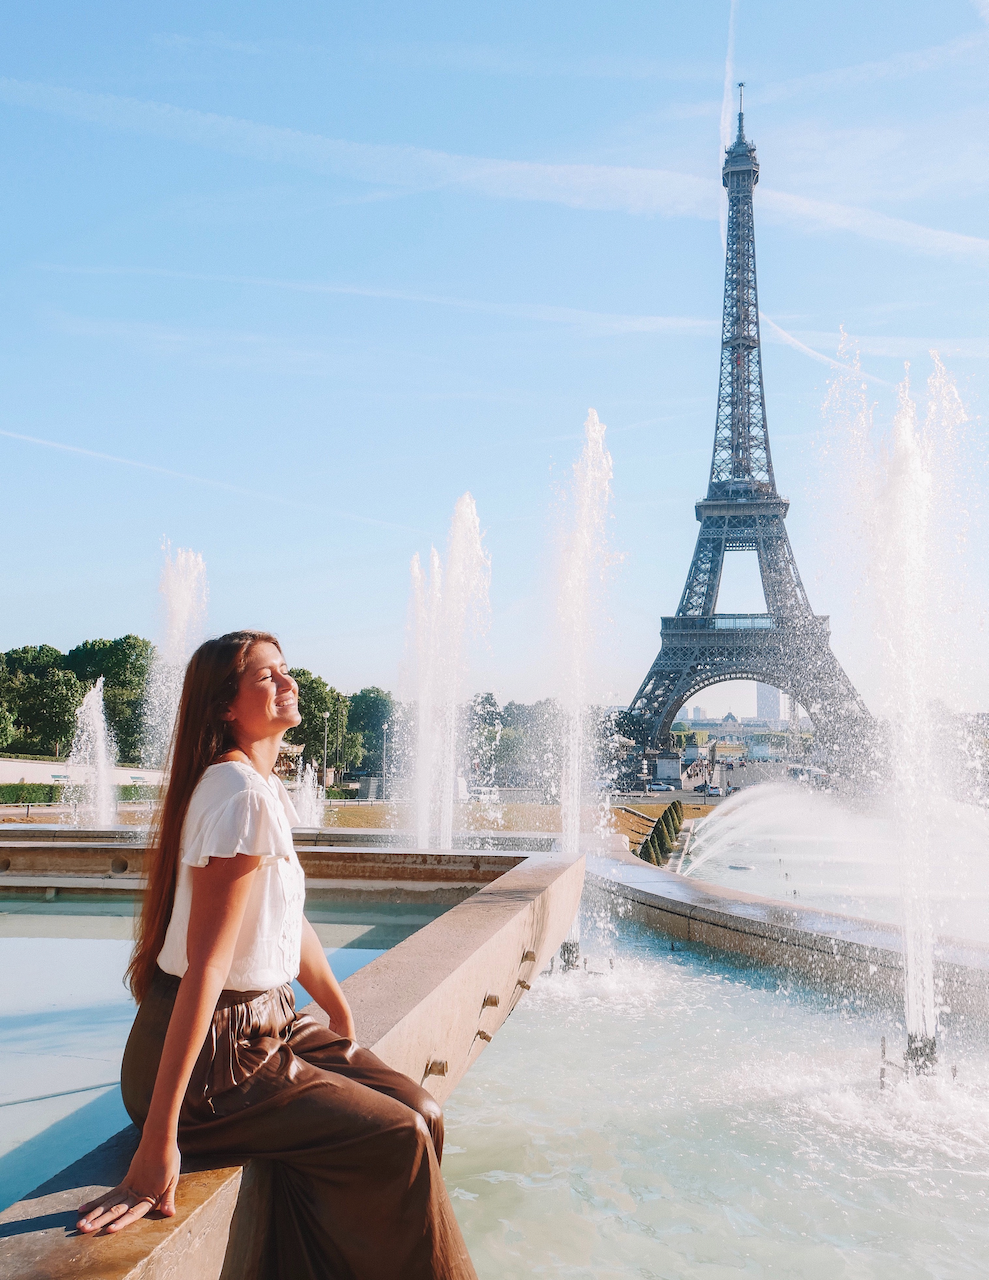 Woman posing at the fountain in front of the Eiffel Tower on a summer day - Paris - France